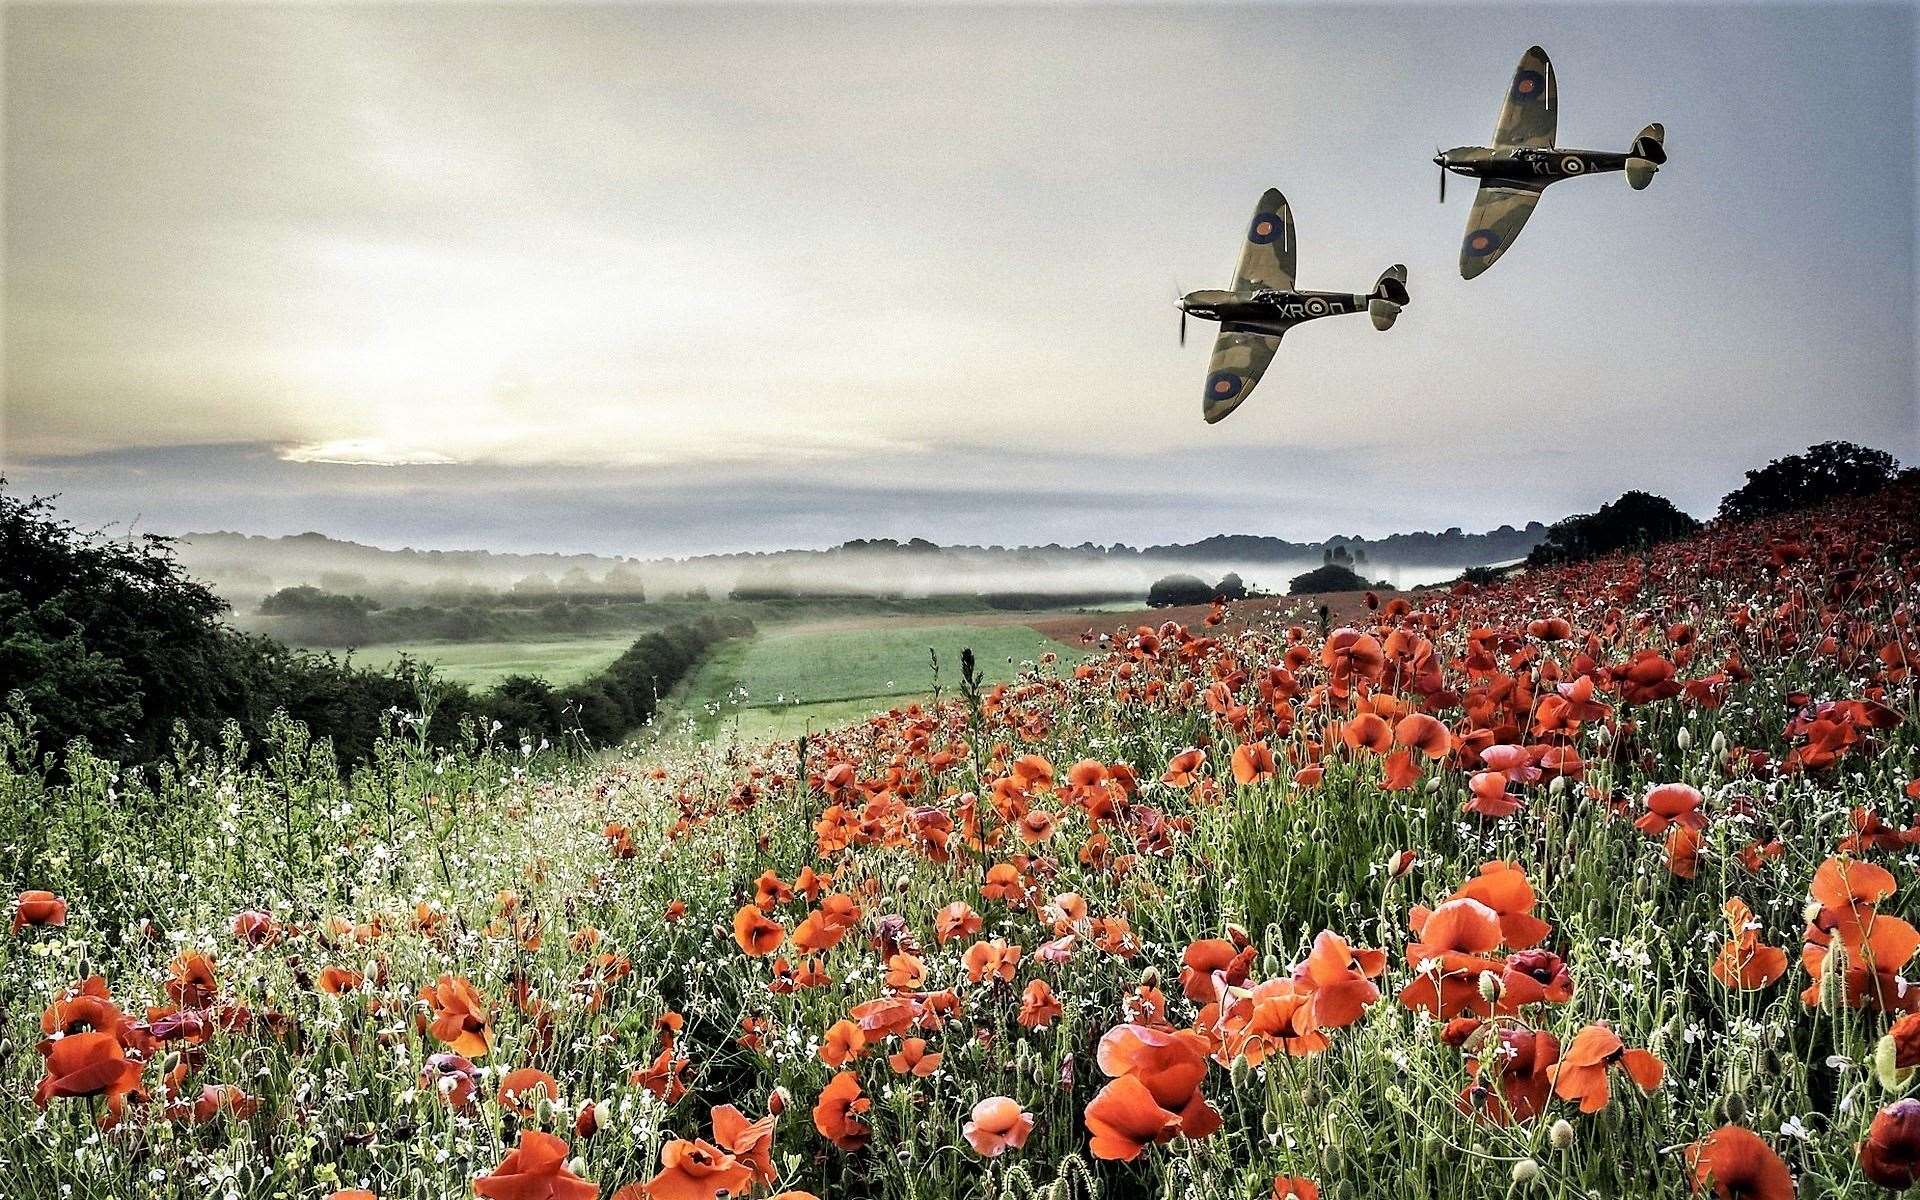 Spitfire aircraft flying by a field of poppies as a symbol of remembrance.